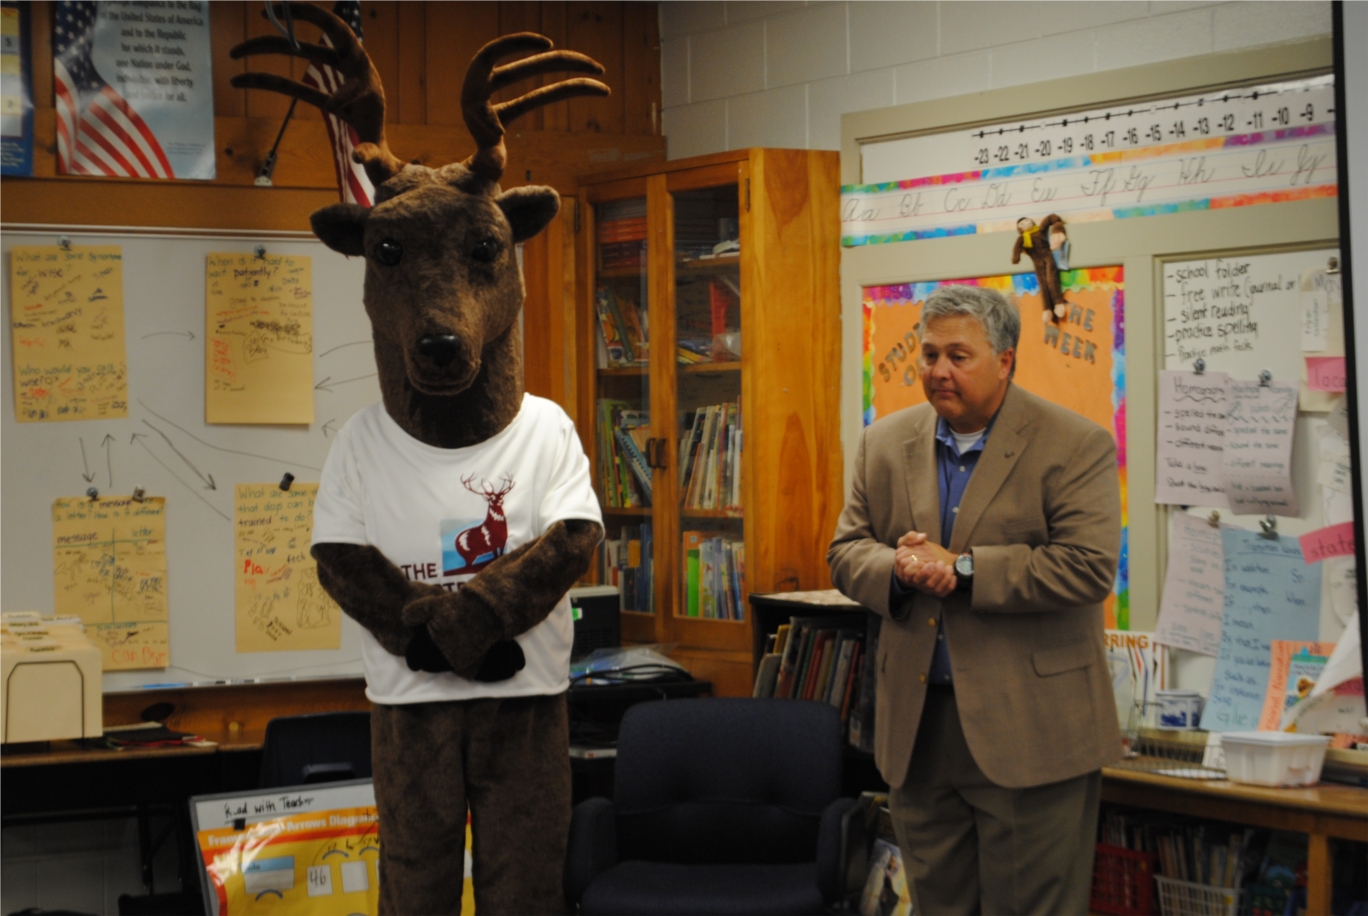 Hartford employee Steve Grebner joined forces with Larry the Stag and Yorkville Fox Valley Therapy Dog Club to talk about Fire prevention at a local elementary school during Fire Safety Month.